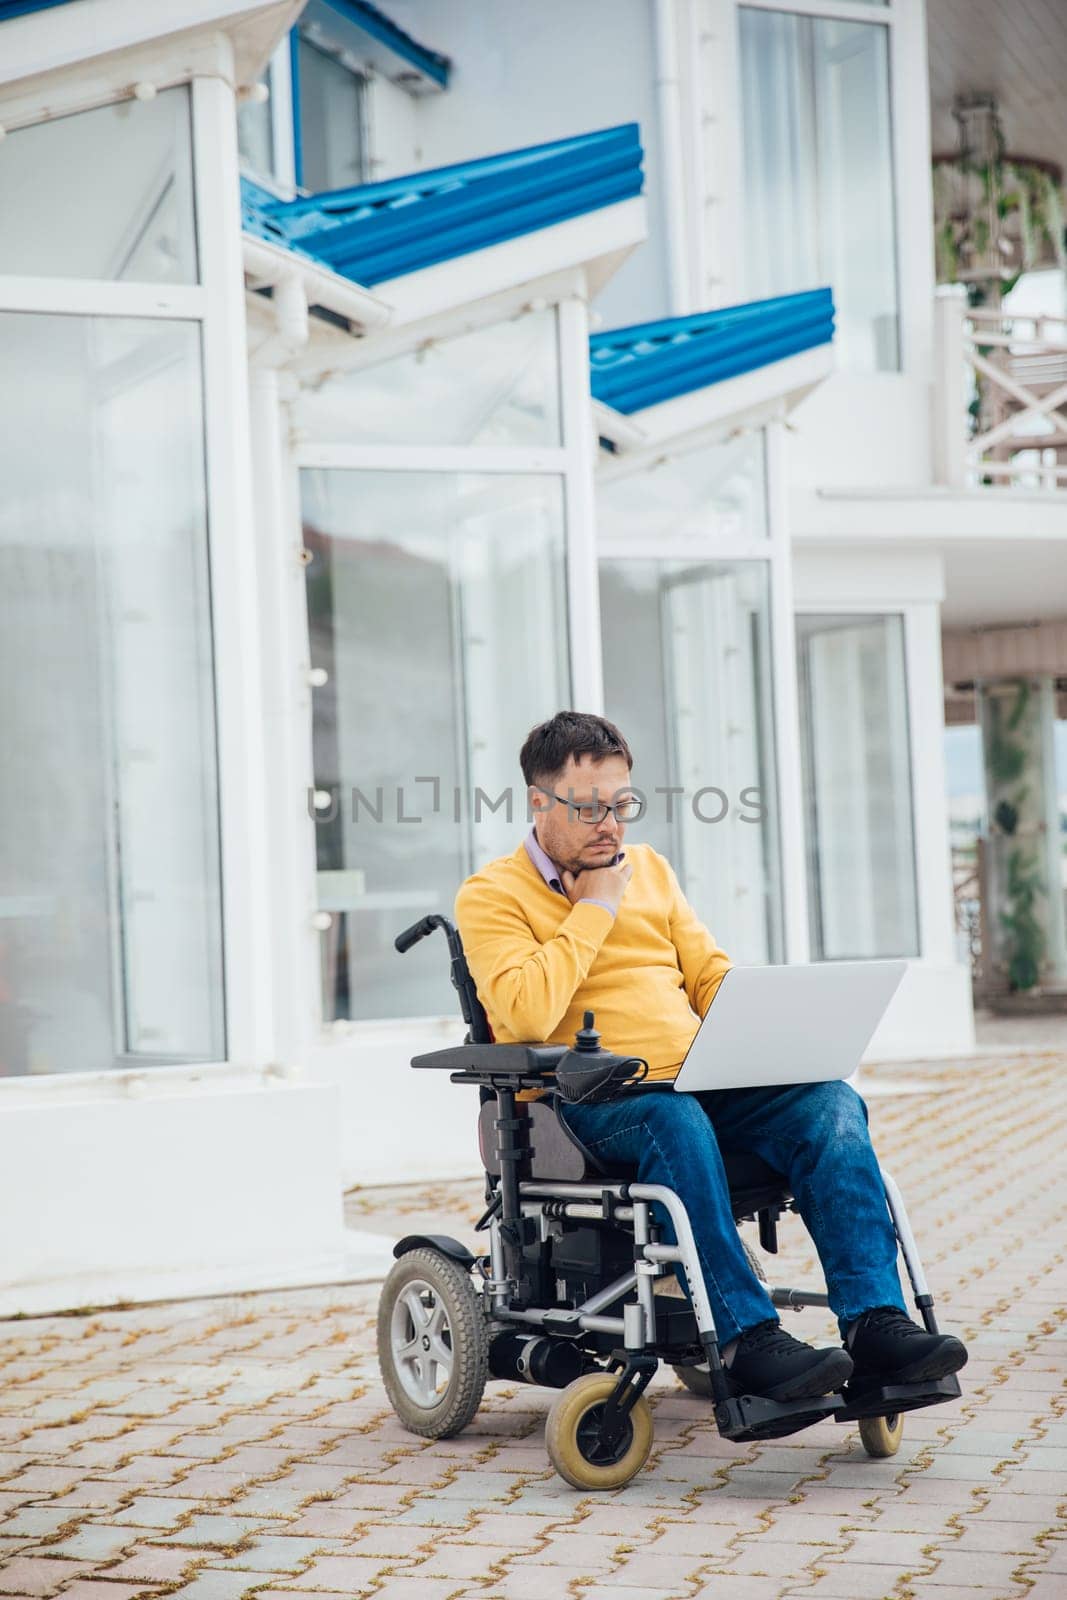 A person with a laptop outside a building on the street by Simakov